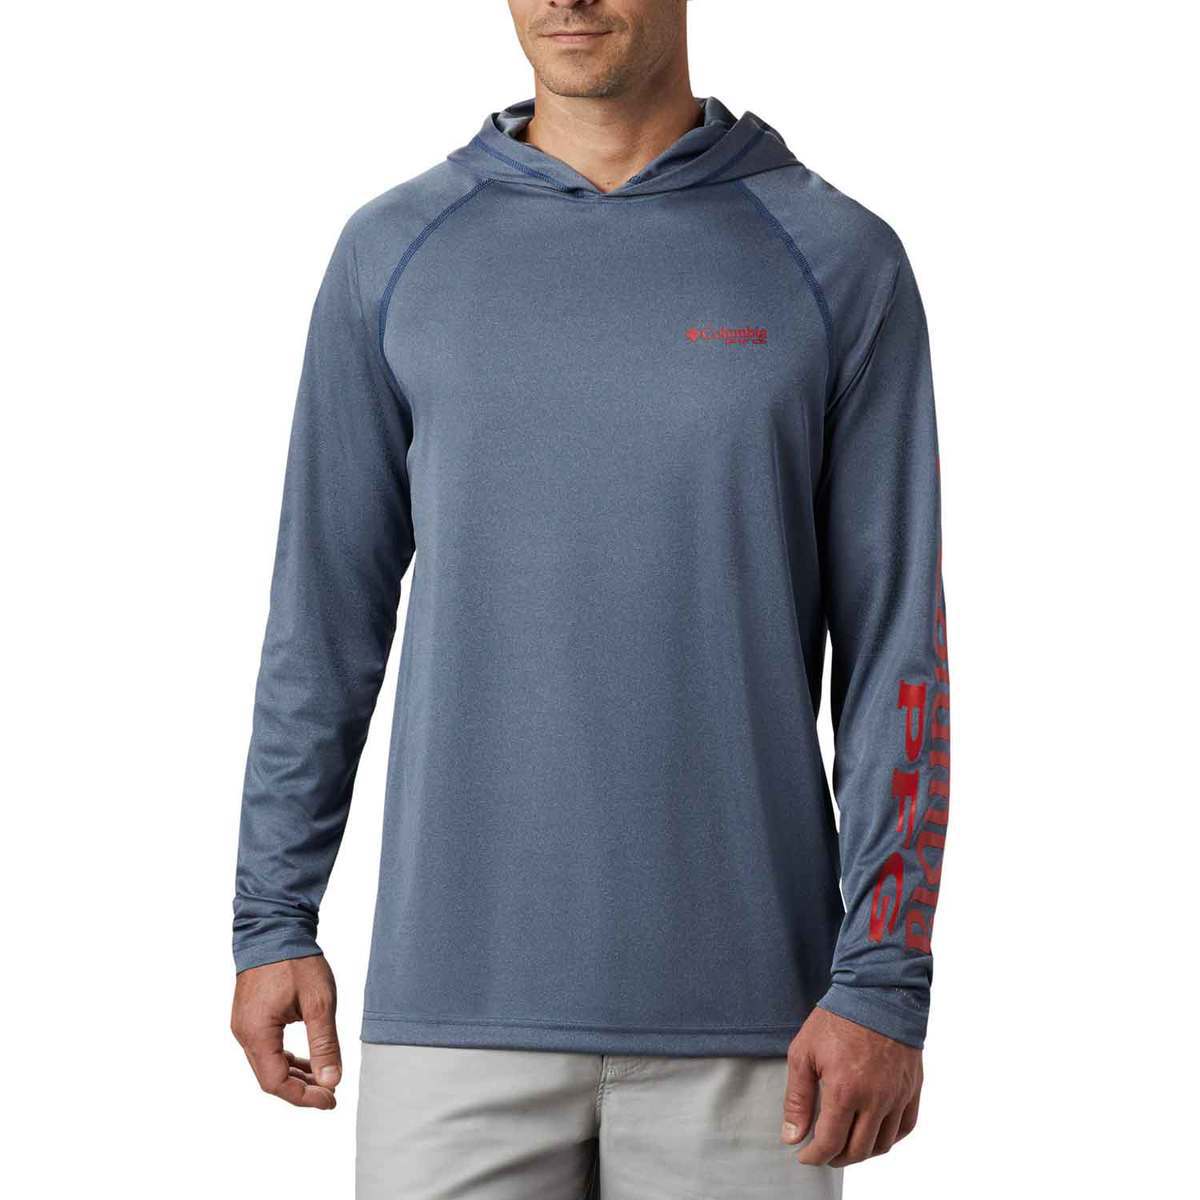 Columbia Men's Terminal Tackle Heather Hoodie, XL, Carbon Heather/Red Spark